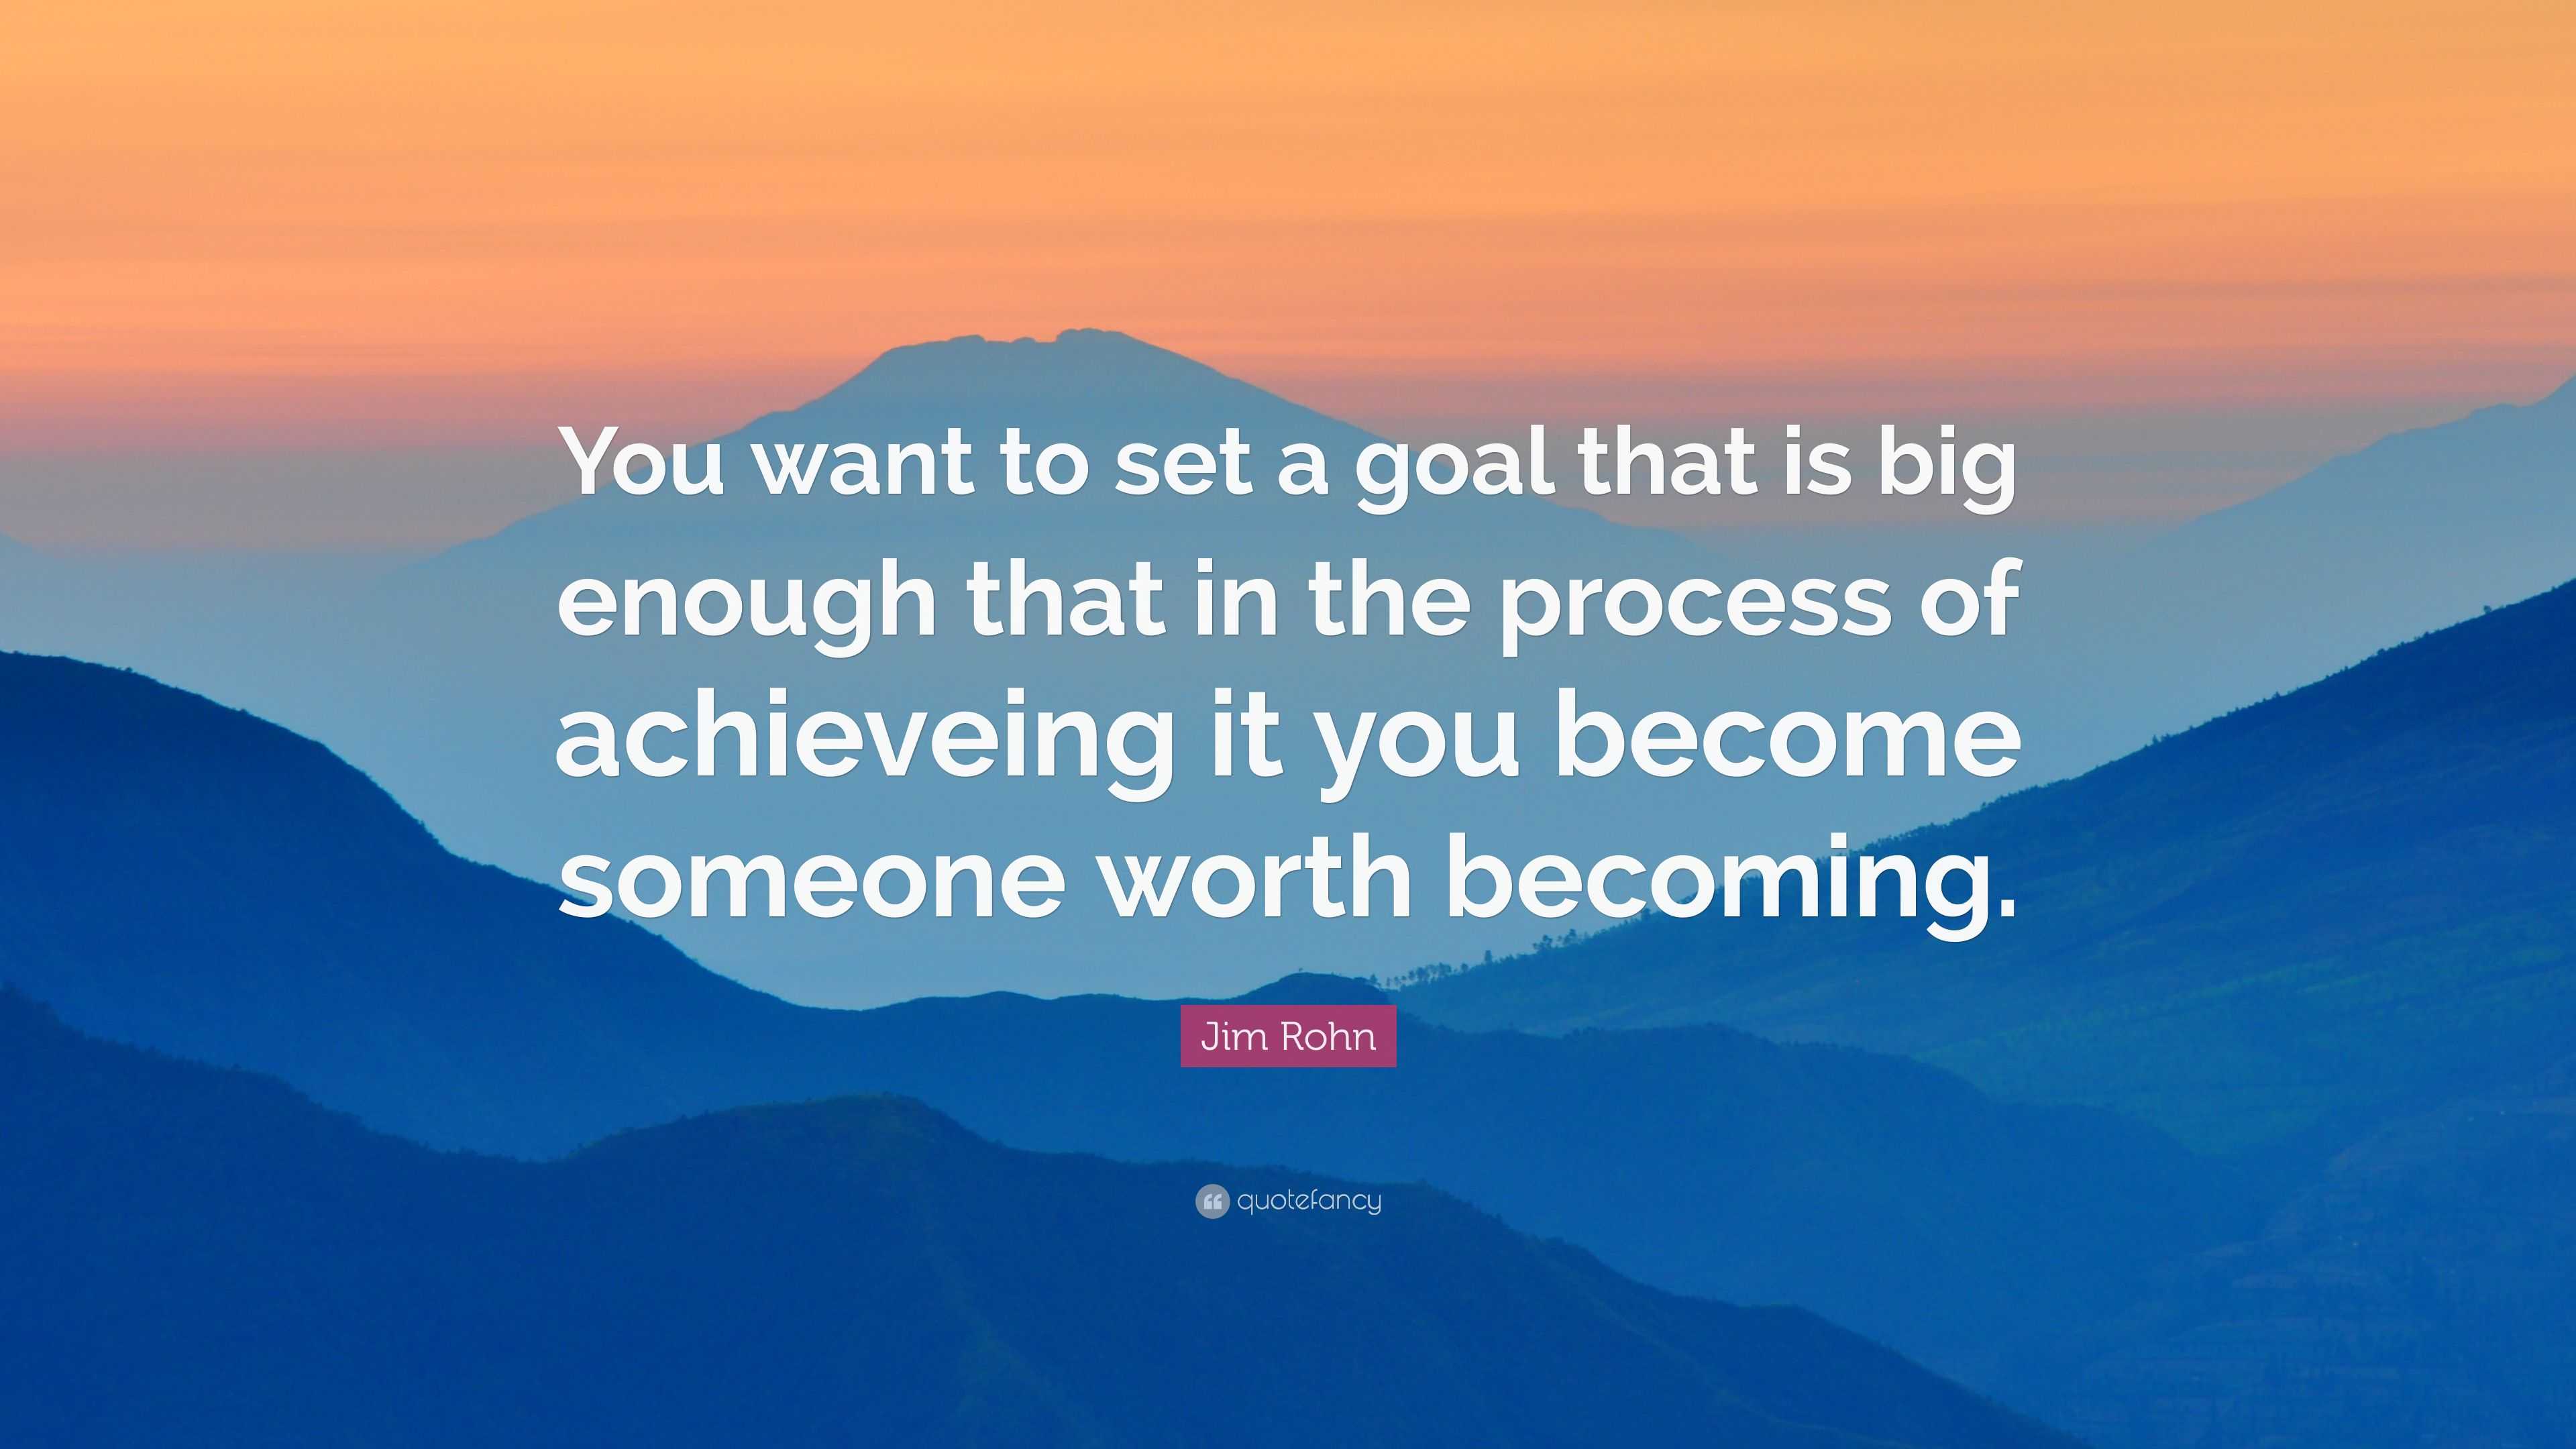 Jim Rohn Quote: “You want to set a goal that is big enough that in the ...